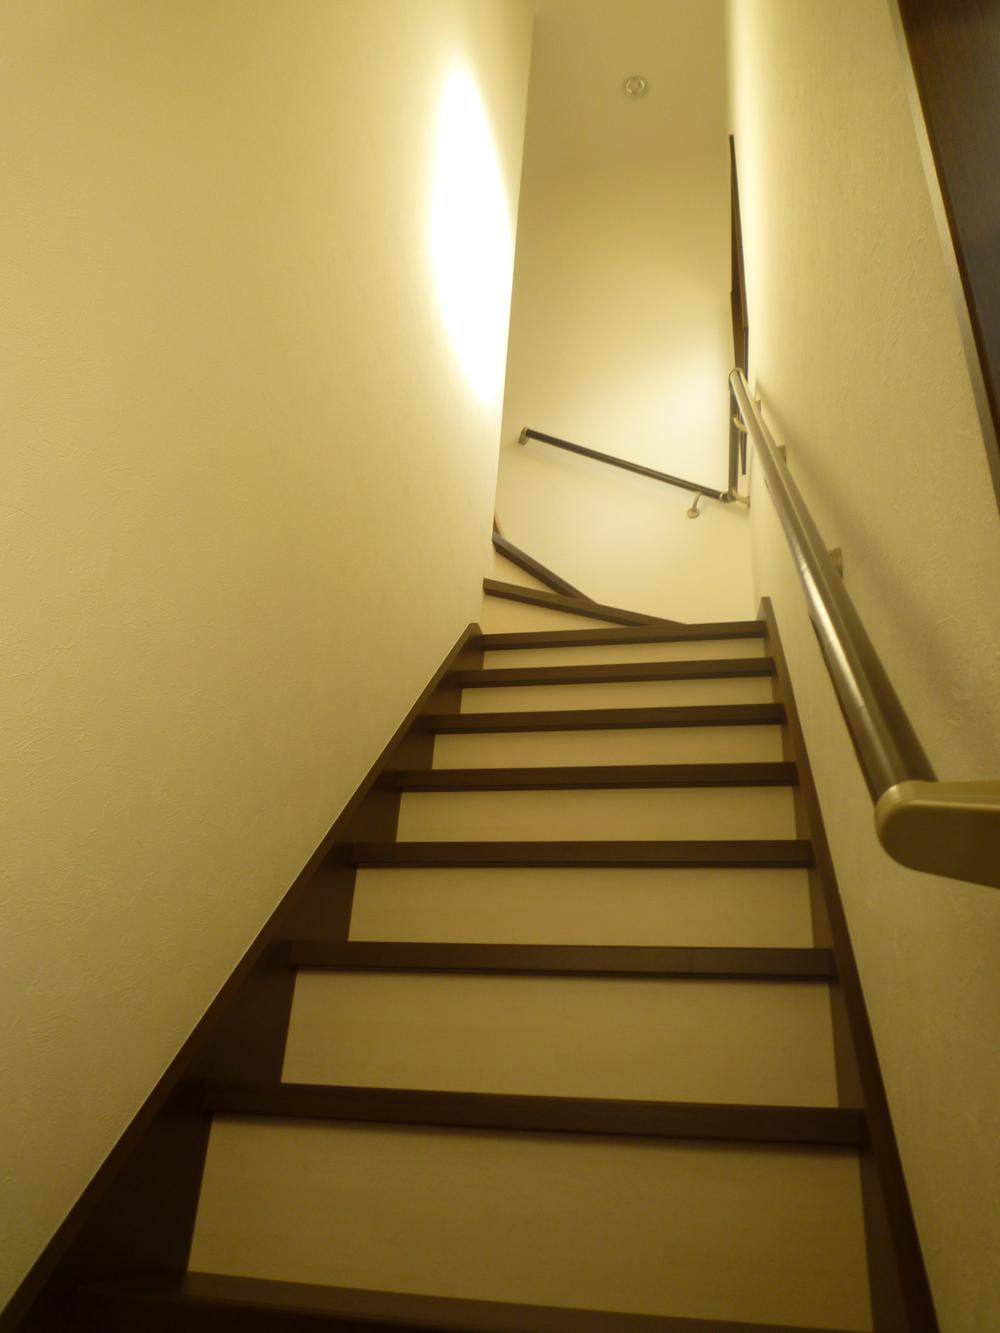 Other. It is the stairs from the second floor to the third floor. 